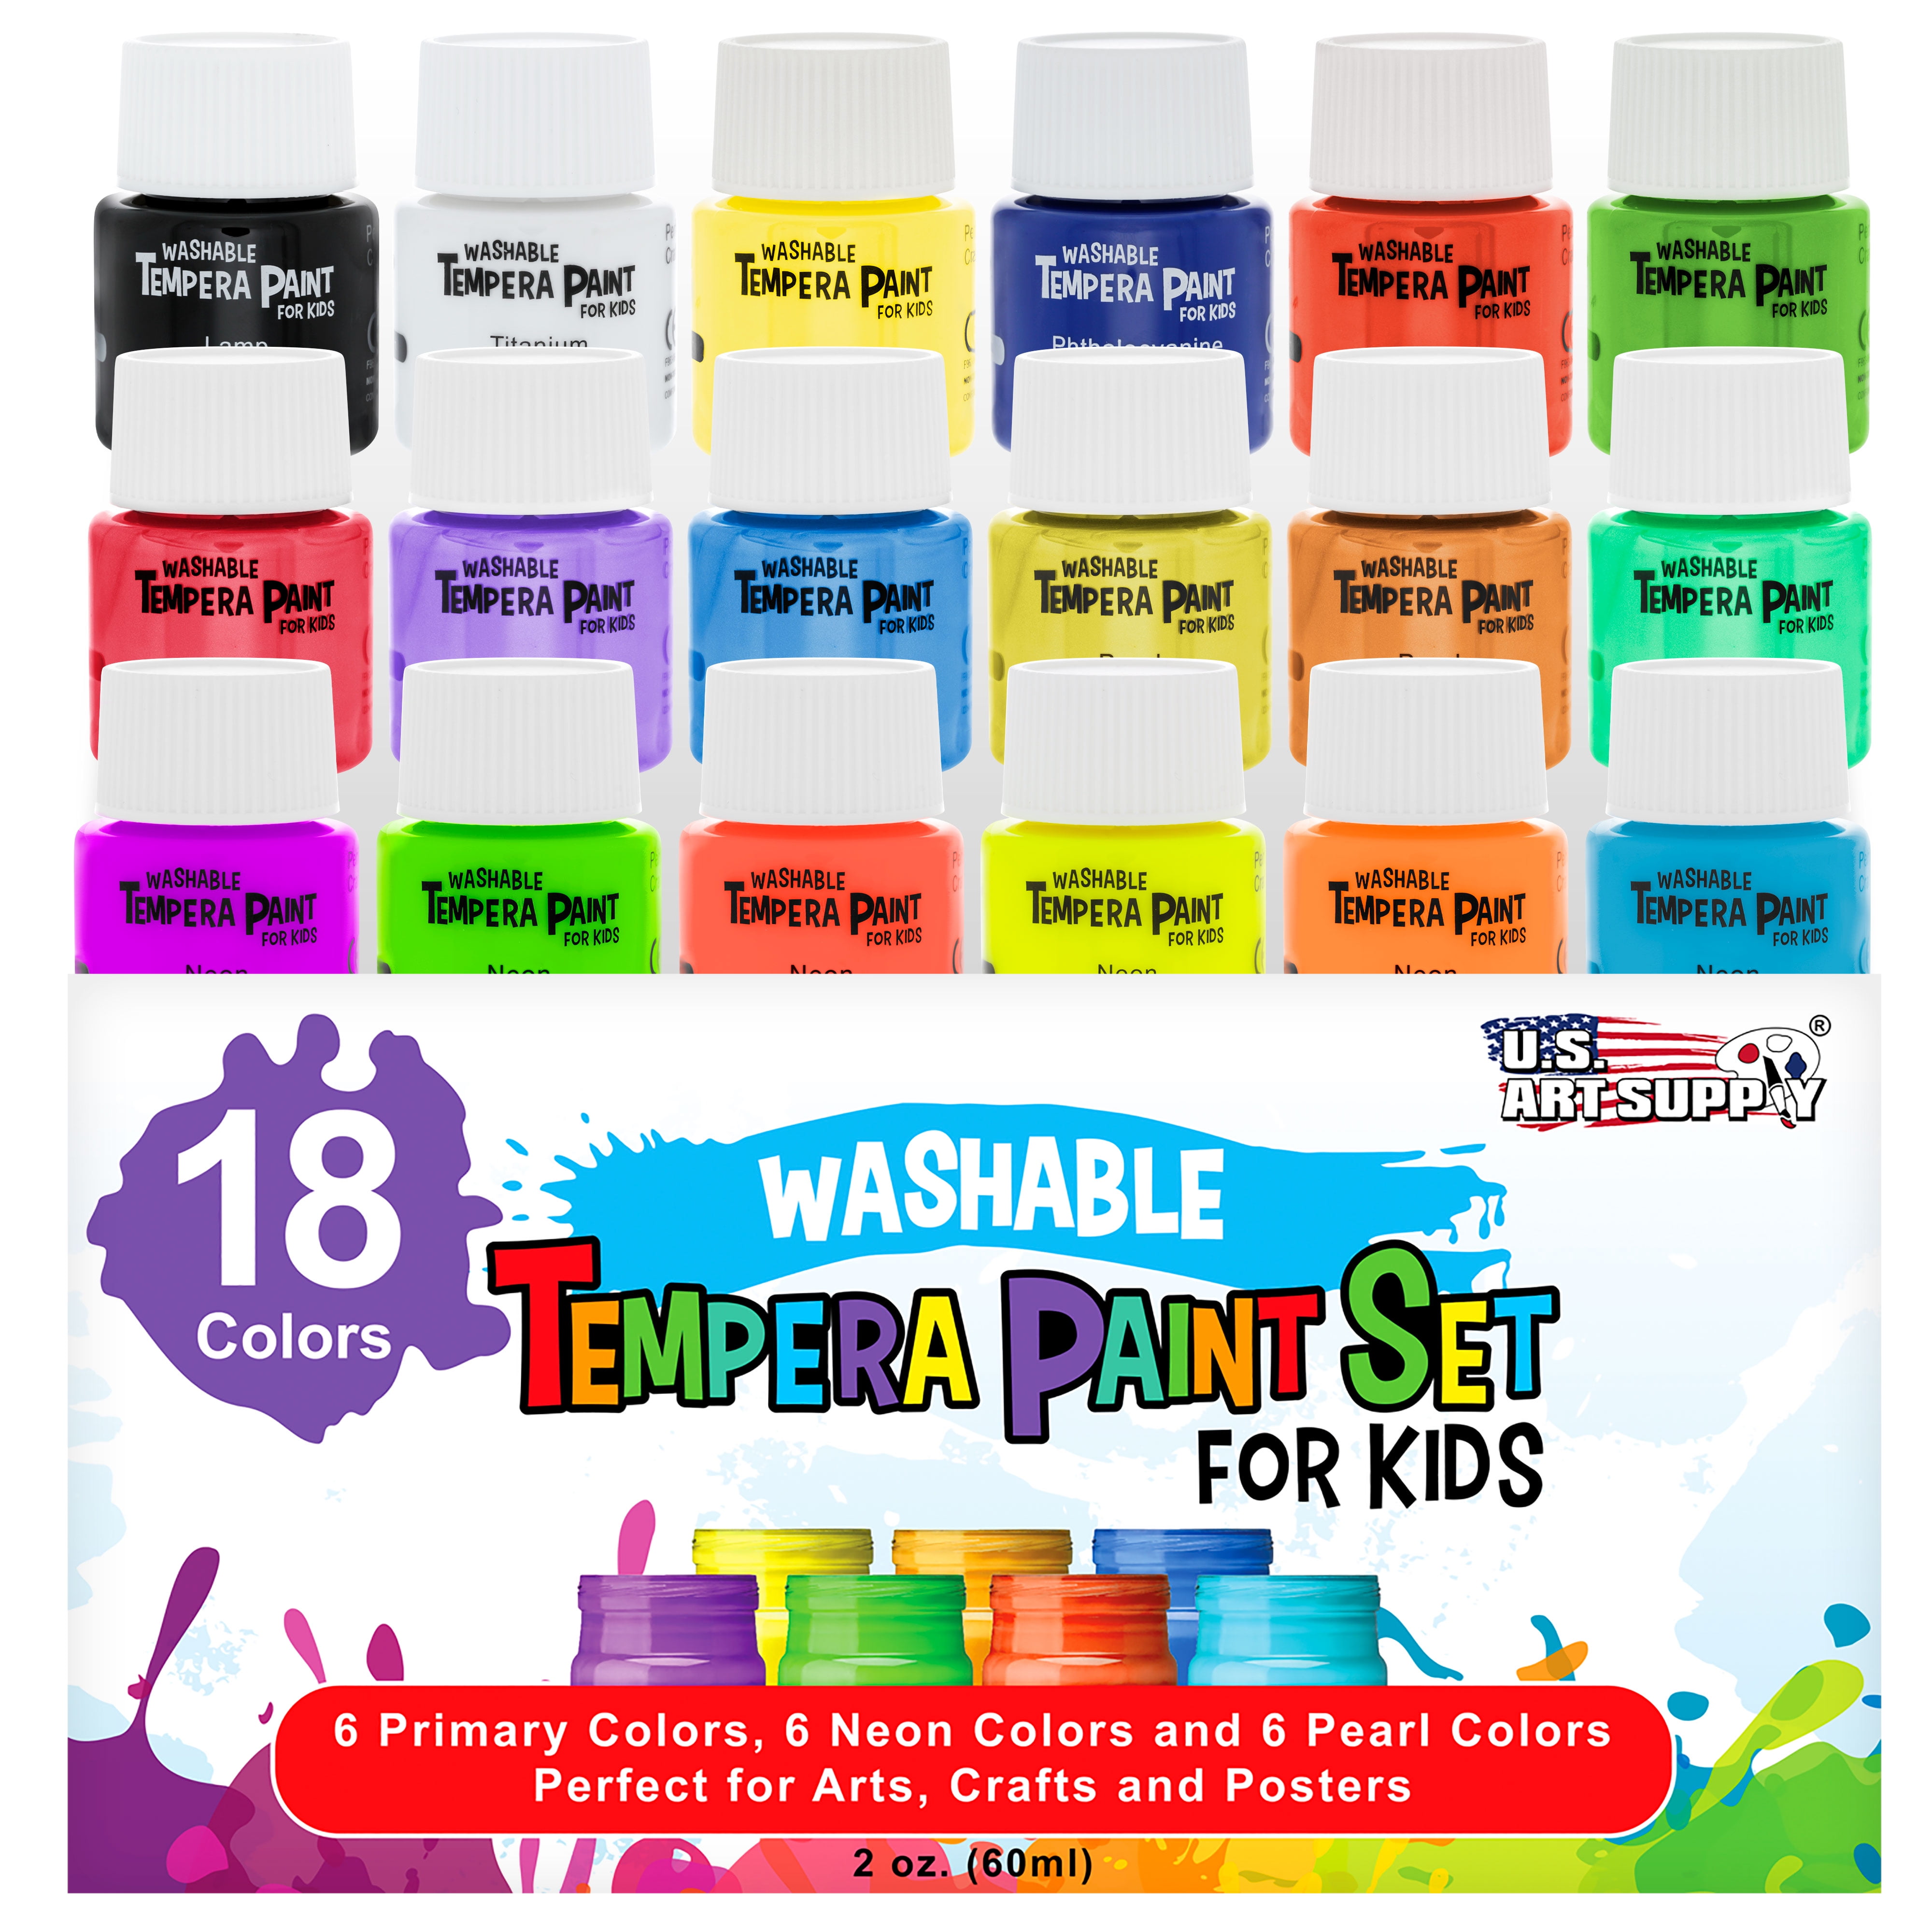 Kingart Tempera Paint Sticks, 60 Vibrant Colors for Kids, Super Quick Drying, Works Great on Paper Wood Glass Ceramic Canvas